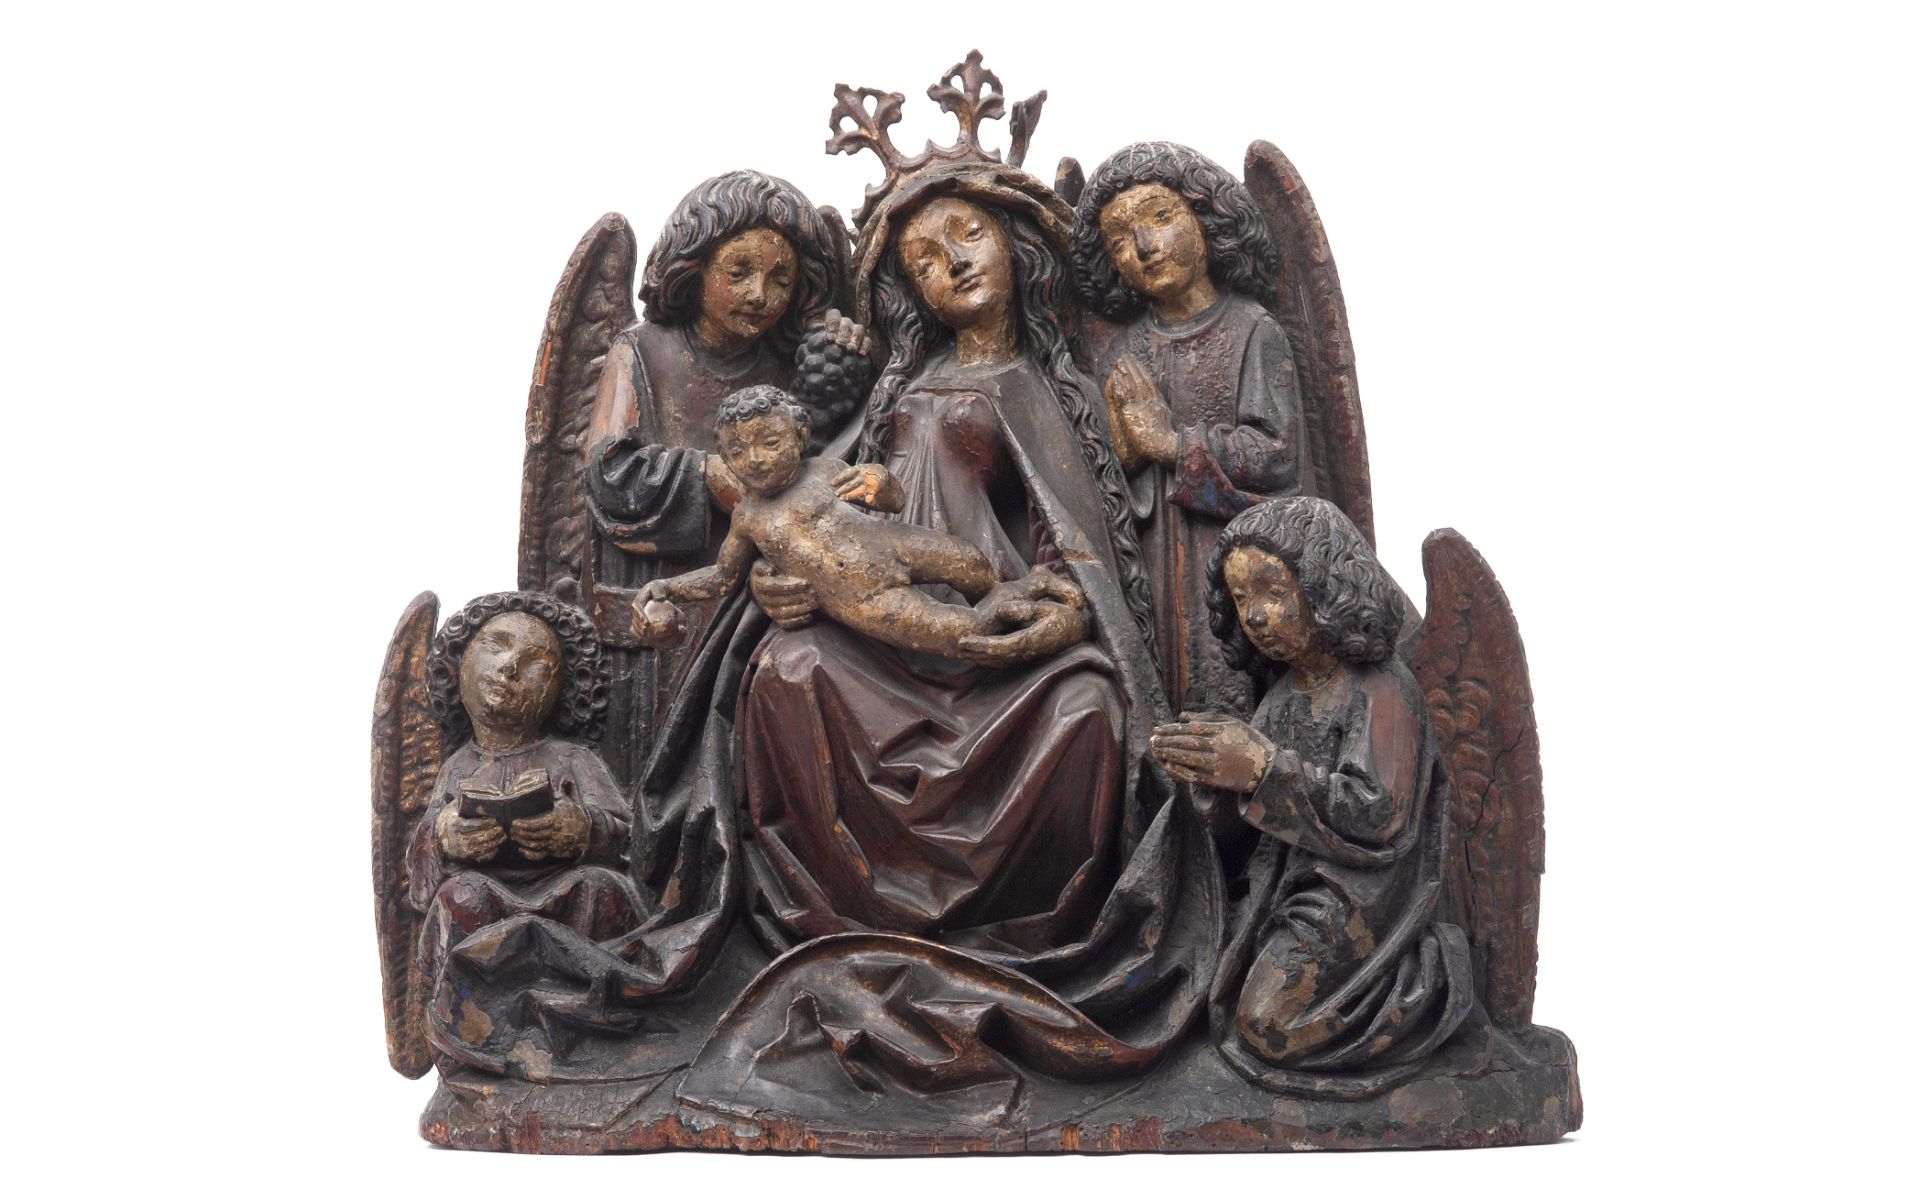 A 15TH CENTURY SOUTH GERMAN (ULM) FIGURAL GROUP OF THE VIRGIN AND CHILD CIRCA 1470 - Image 2 of 7